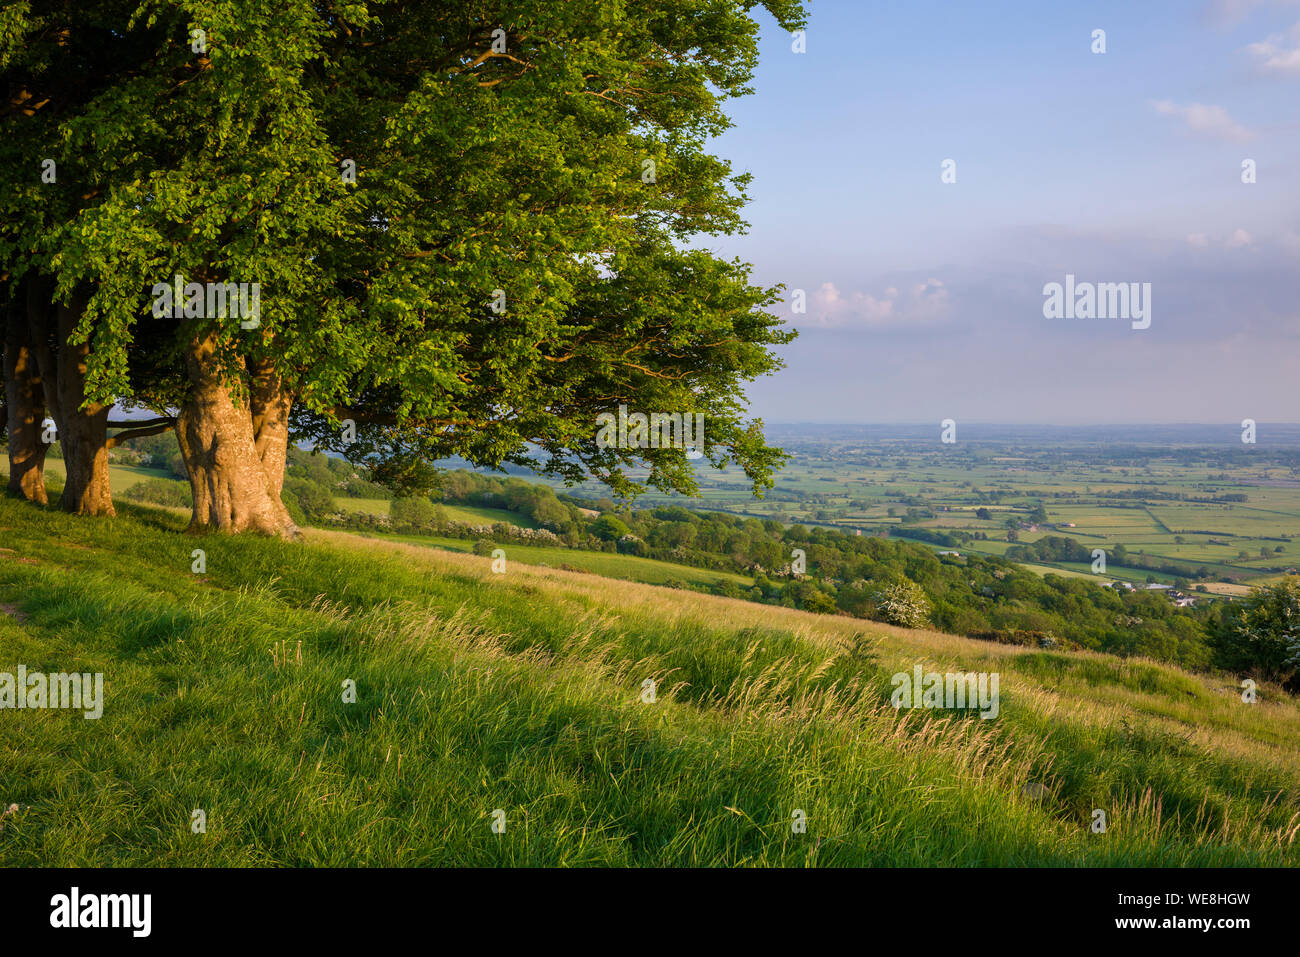 The view from Draycott Sleights in the Mendip Hills National Landscape over the Somerset Levels, England. Stock Photo